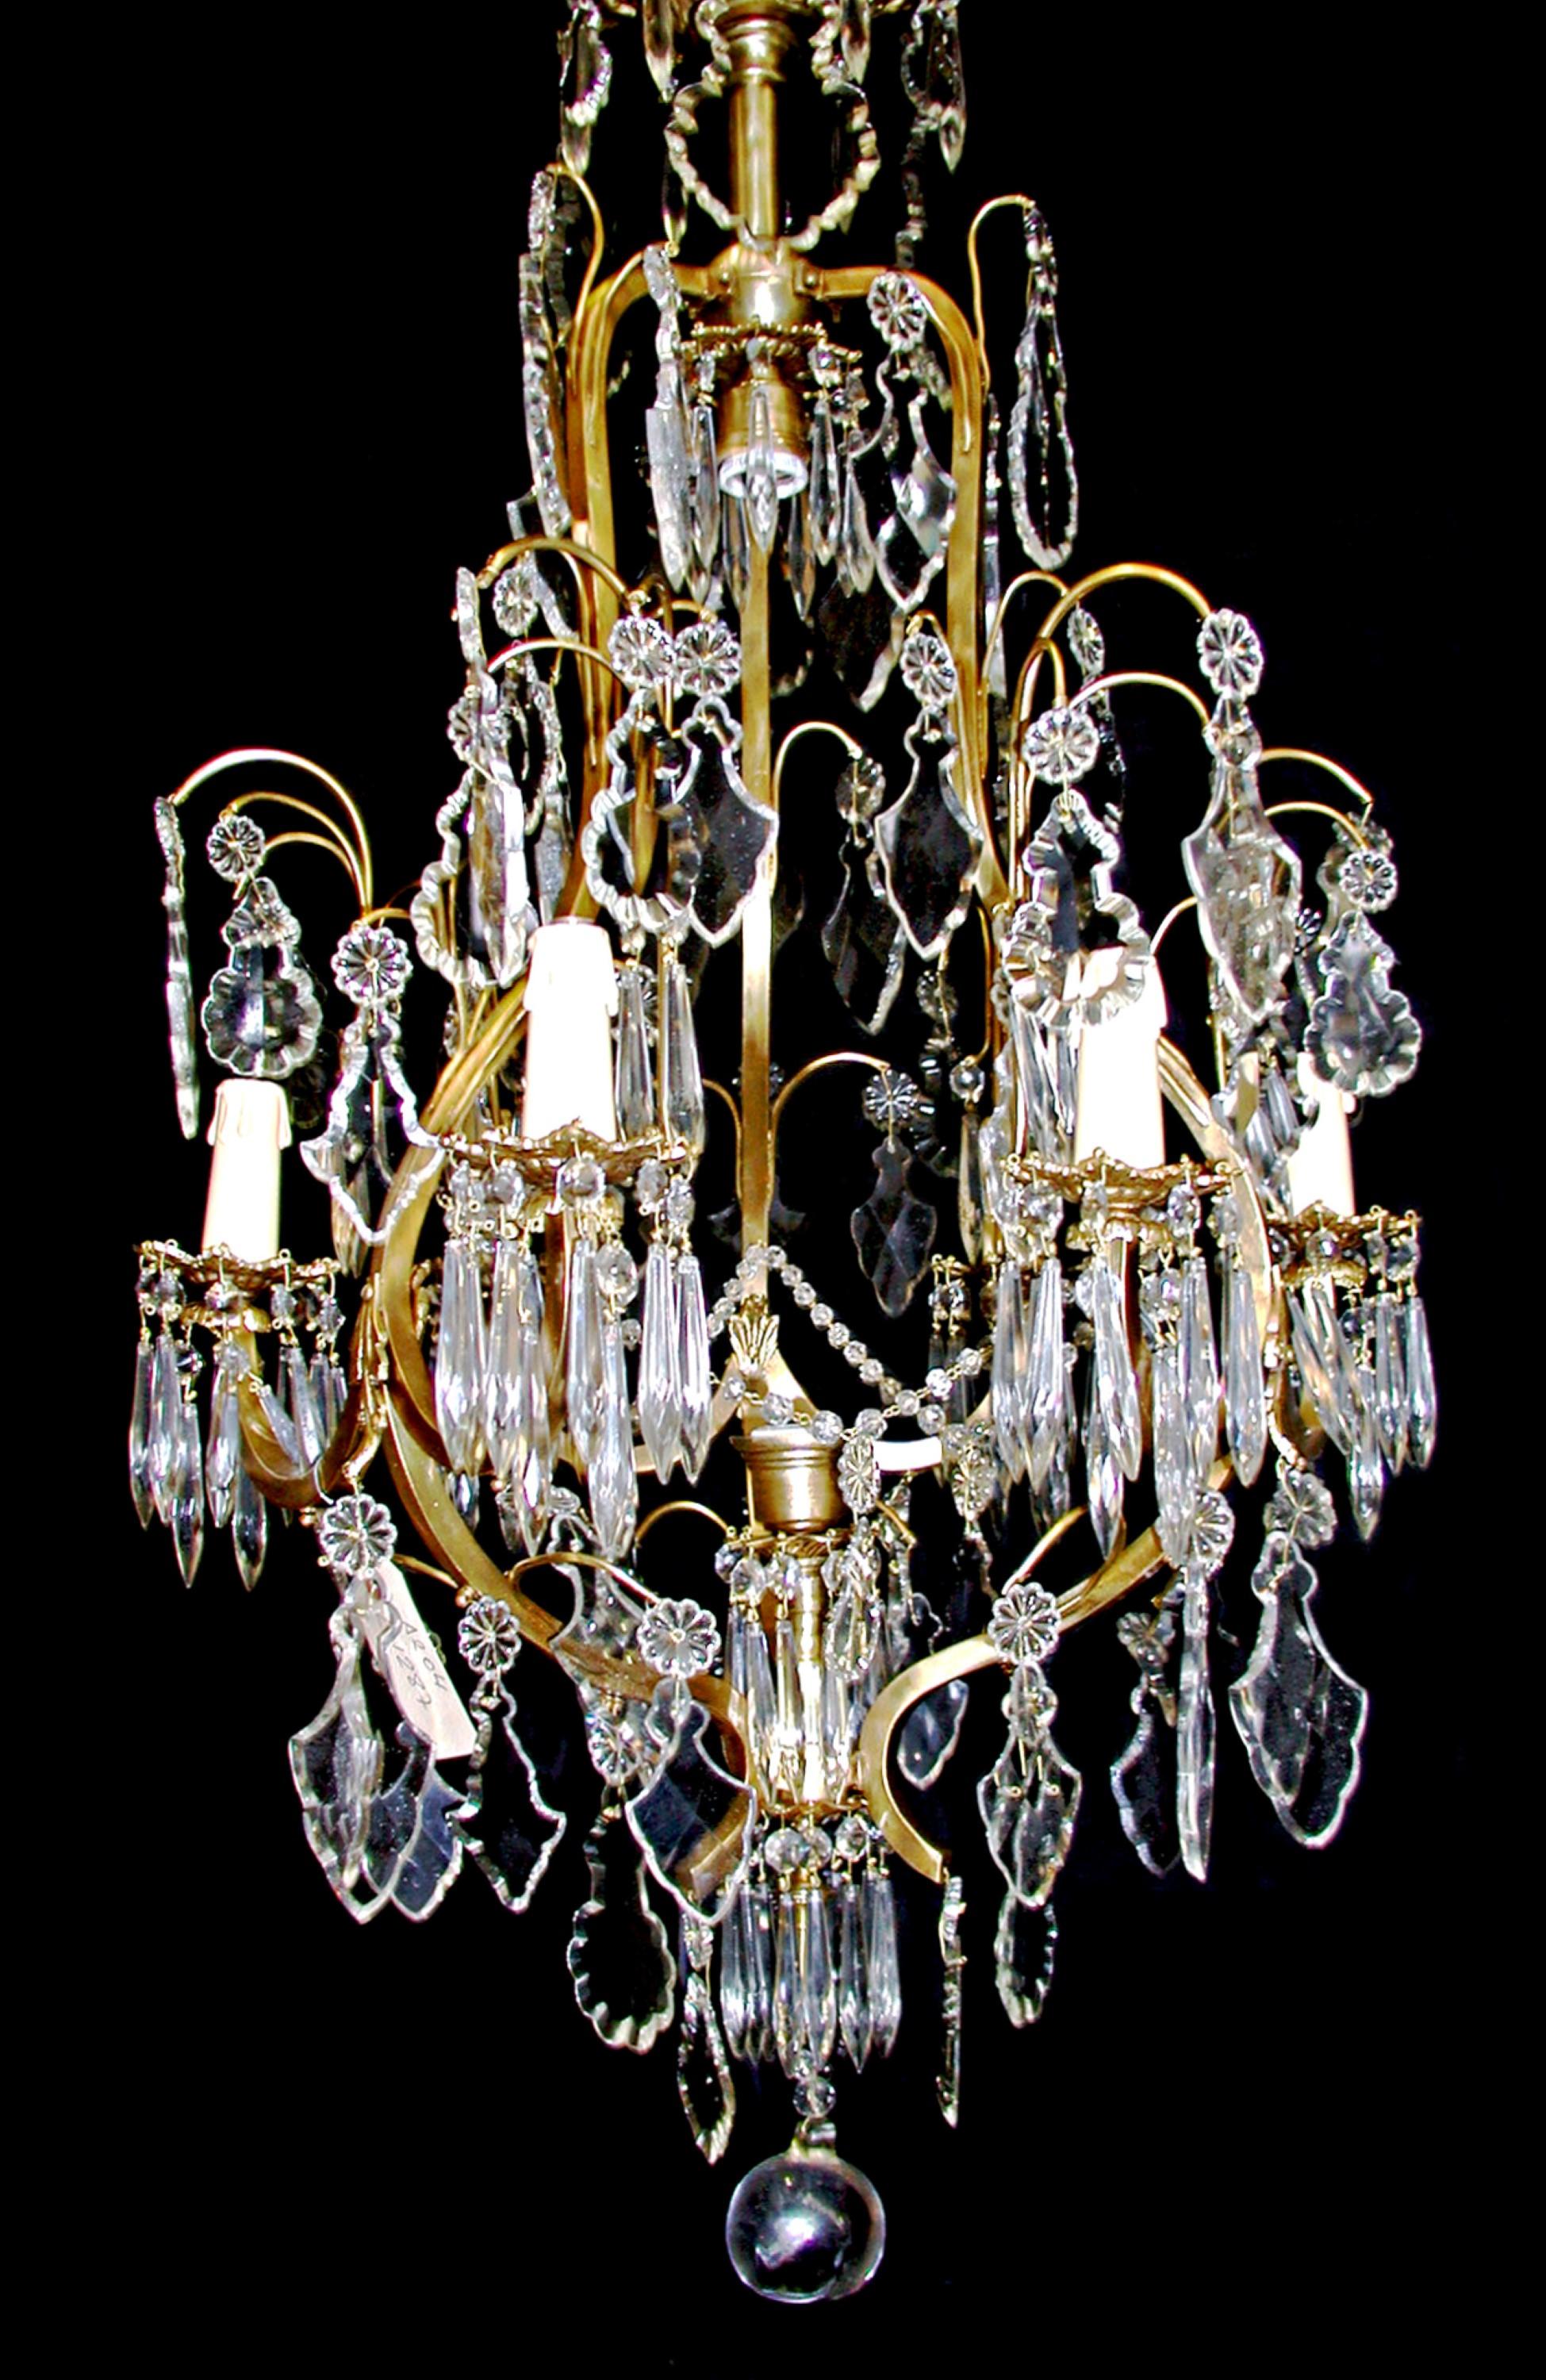 Cut crystal Italian style chandelier with six arms and a gilded gold brass frame. This light is cleaned and restored. Please specify the overall drop that is needed upon purchasing. Please note, this item is located in our Los Angeles location.